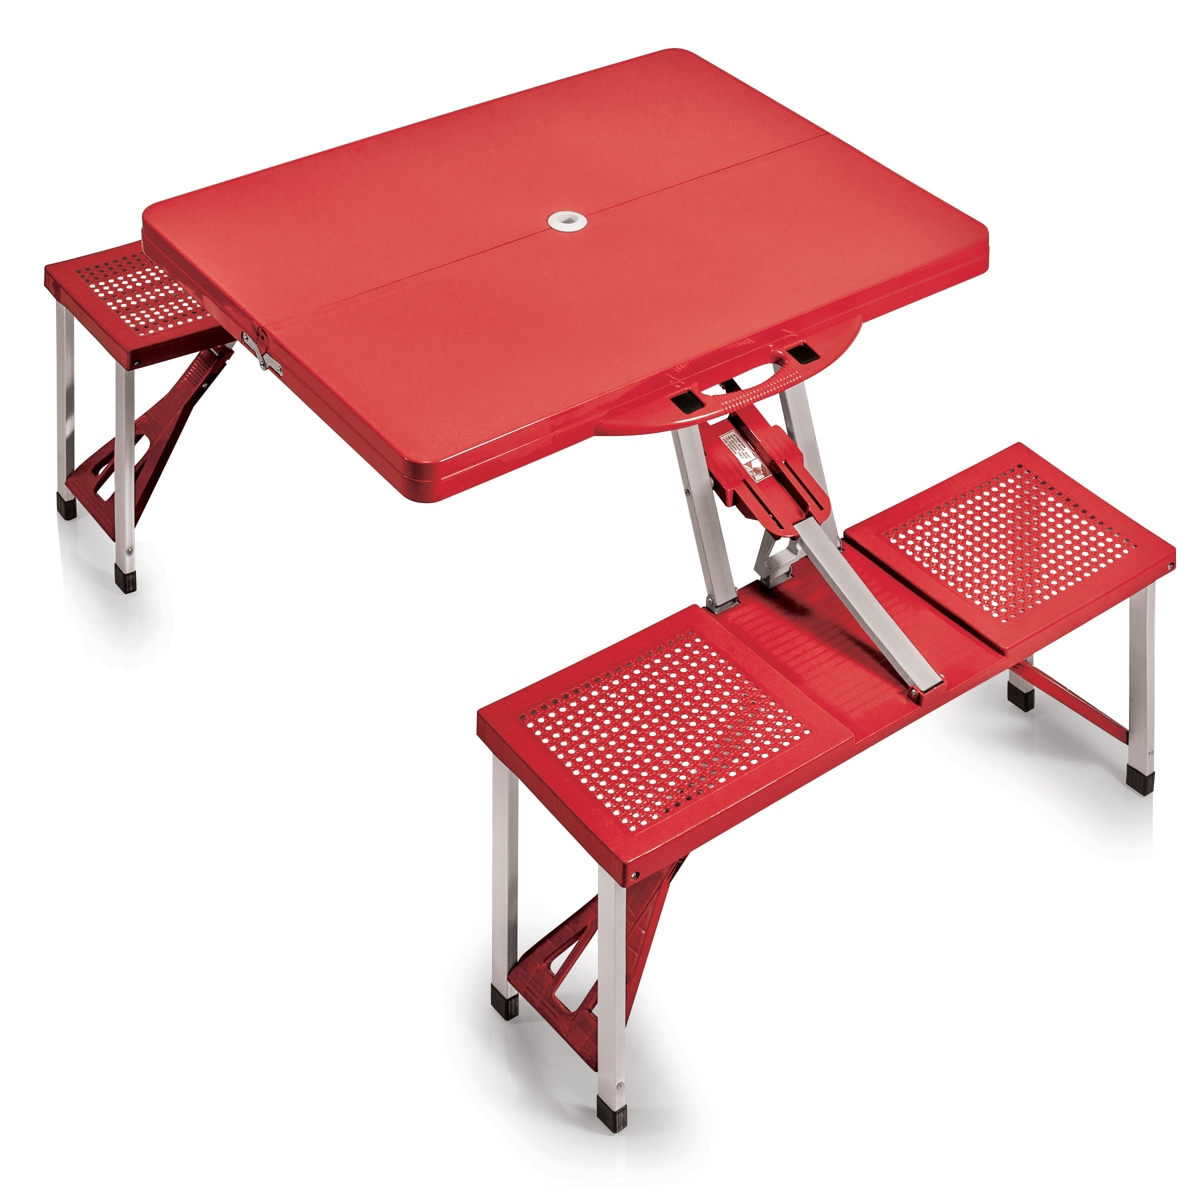 by Picnic Time Picnic Table Portable Folding Table with Seats - Red